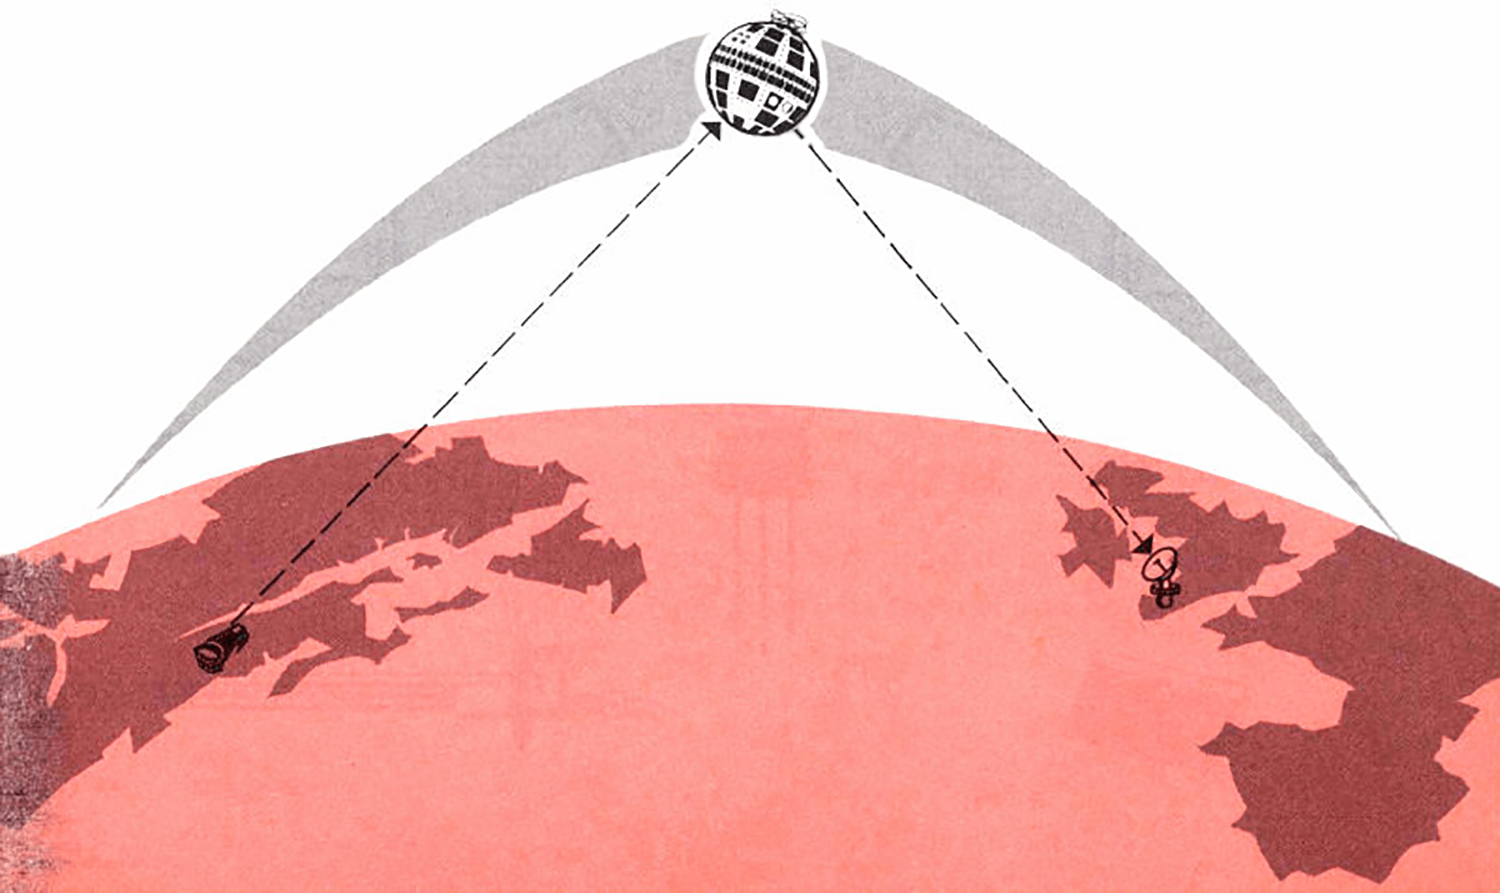 Illustration showing two-way satellite comms between Goonhilly and the USA